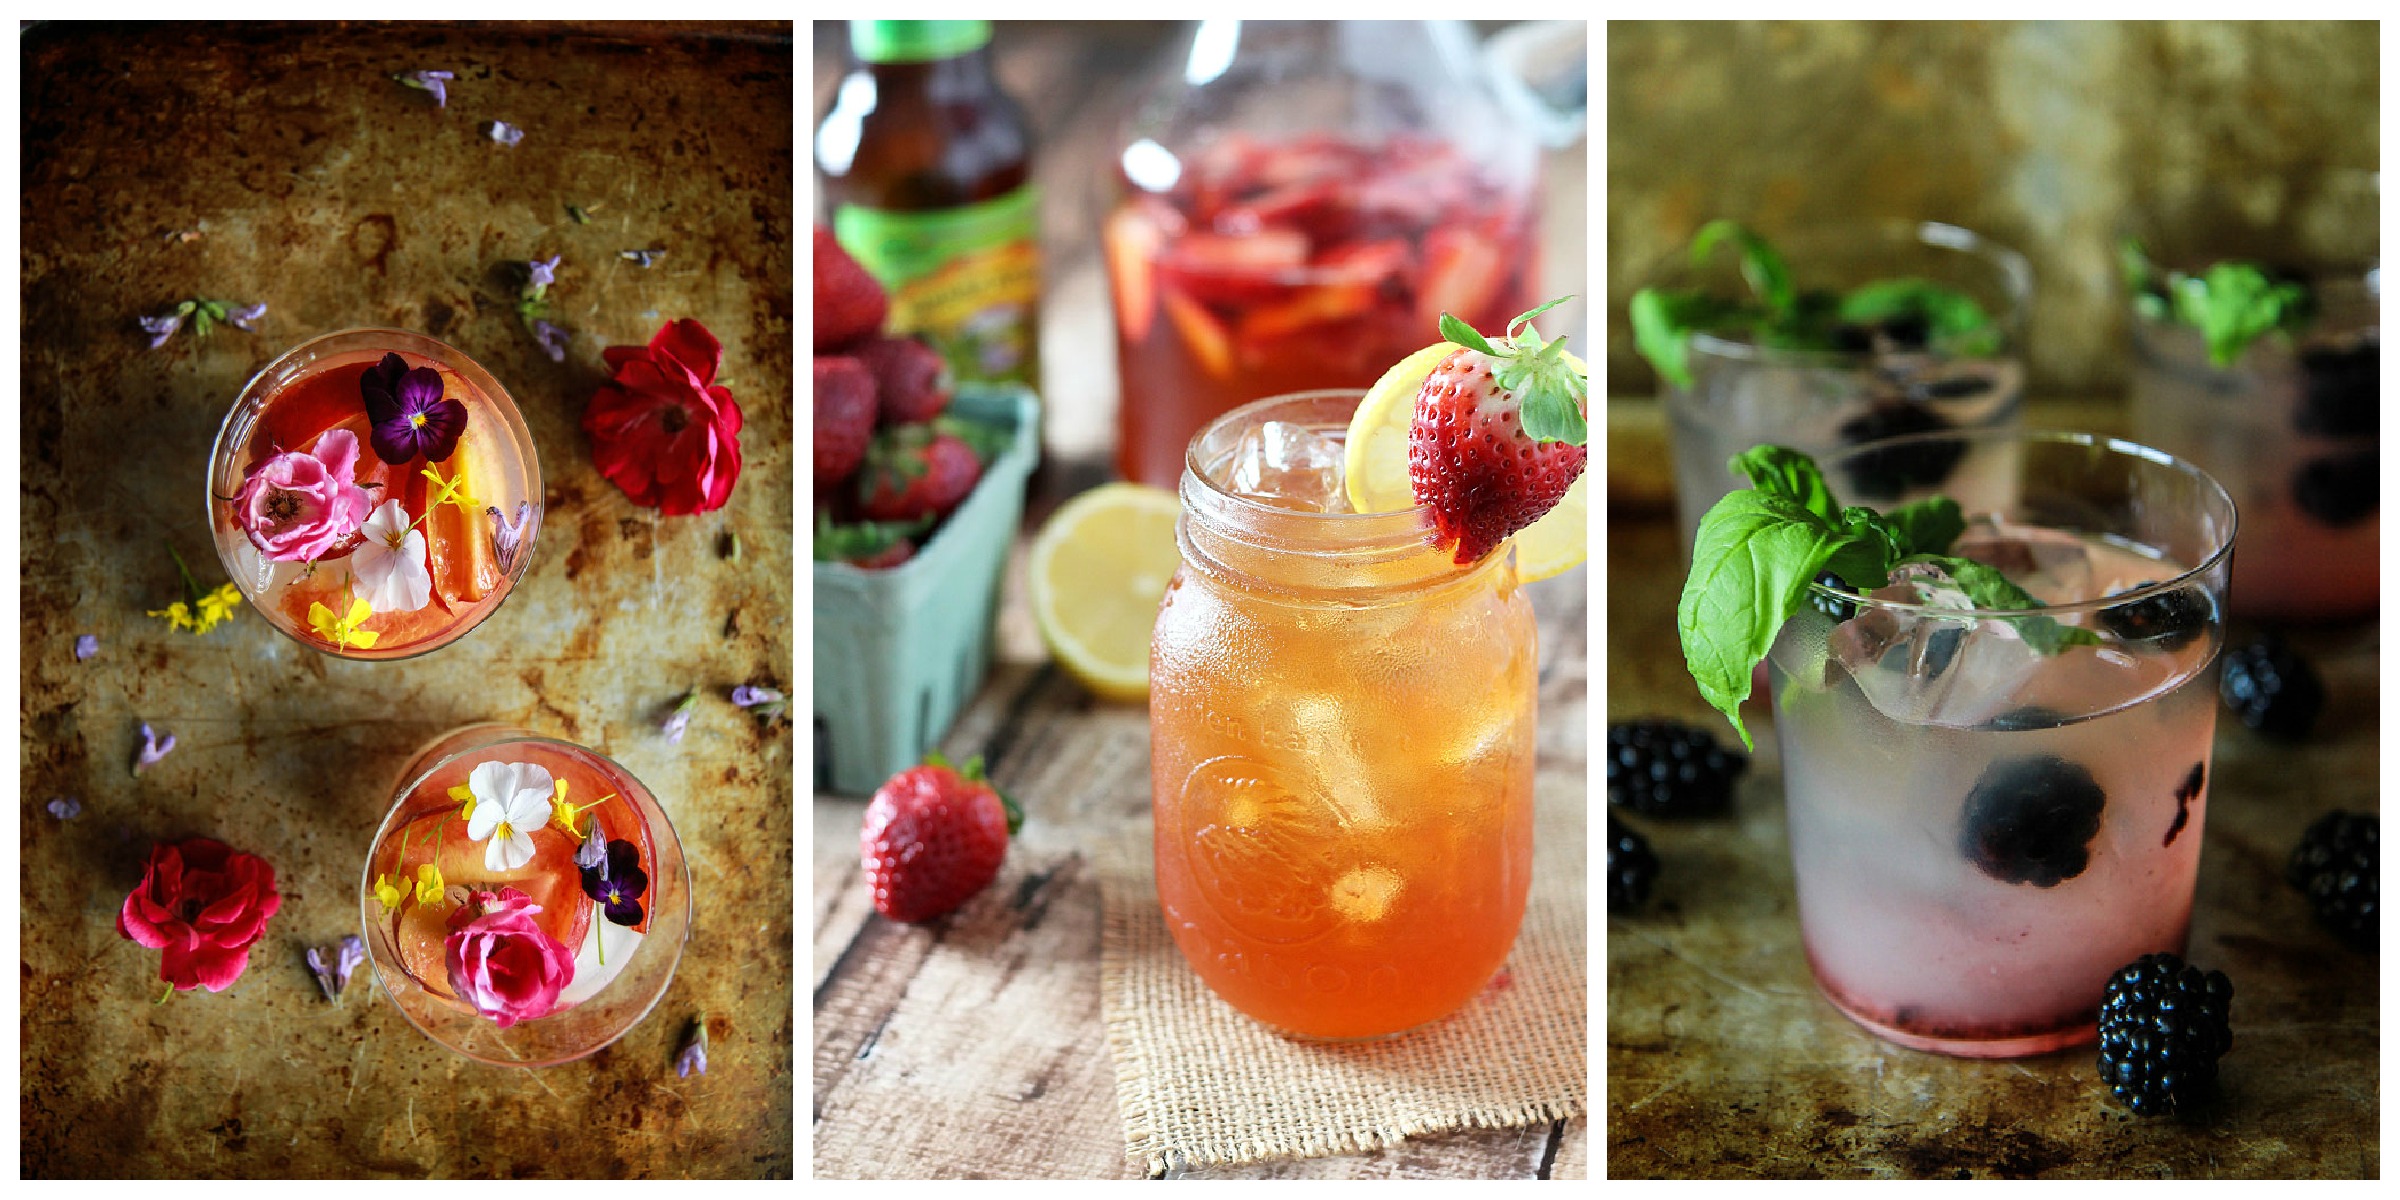 The Best Lemonade Recipes on cravingsofalunatic.com- Spend your summer sipping all The Best Lemonade Recipes you can get your hands on. Summer is all about refreshing beverages so make the most of it!